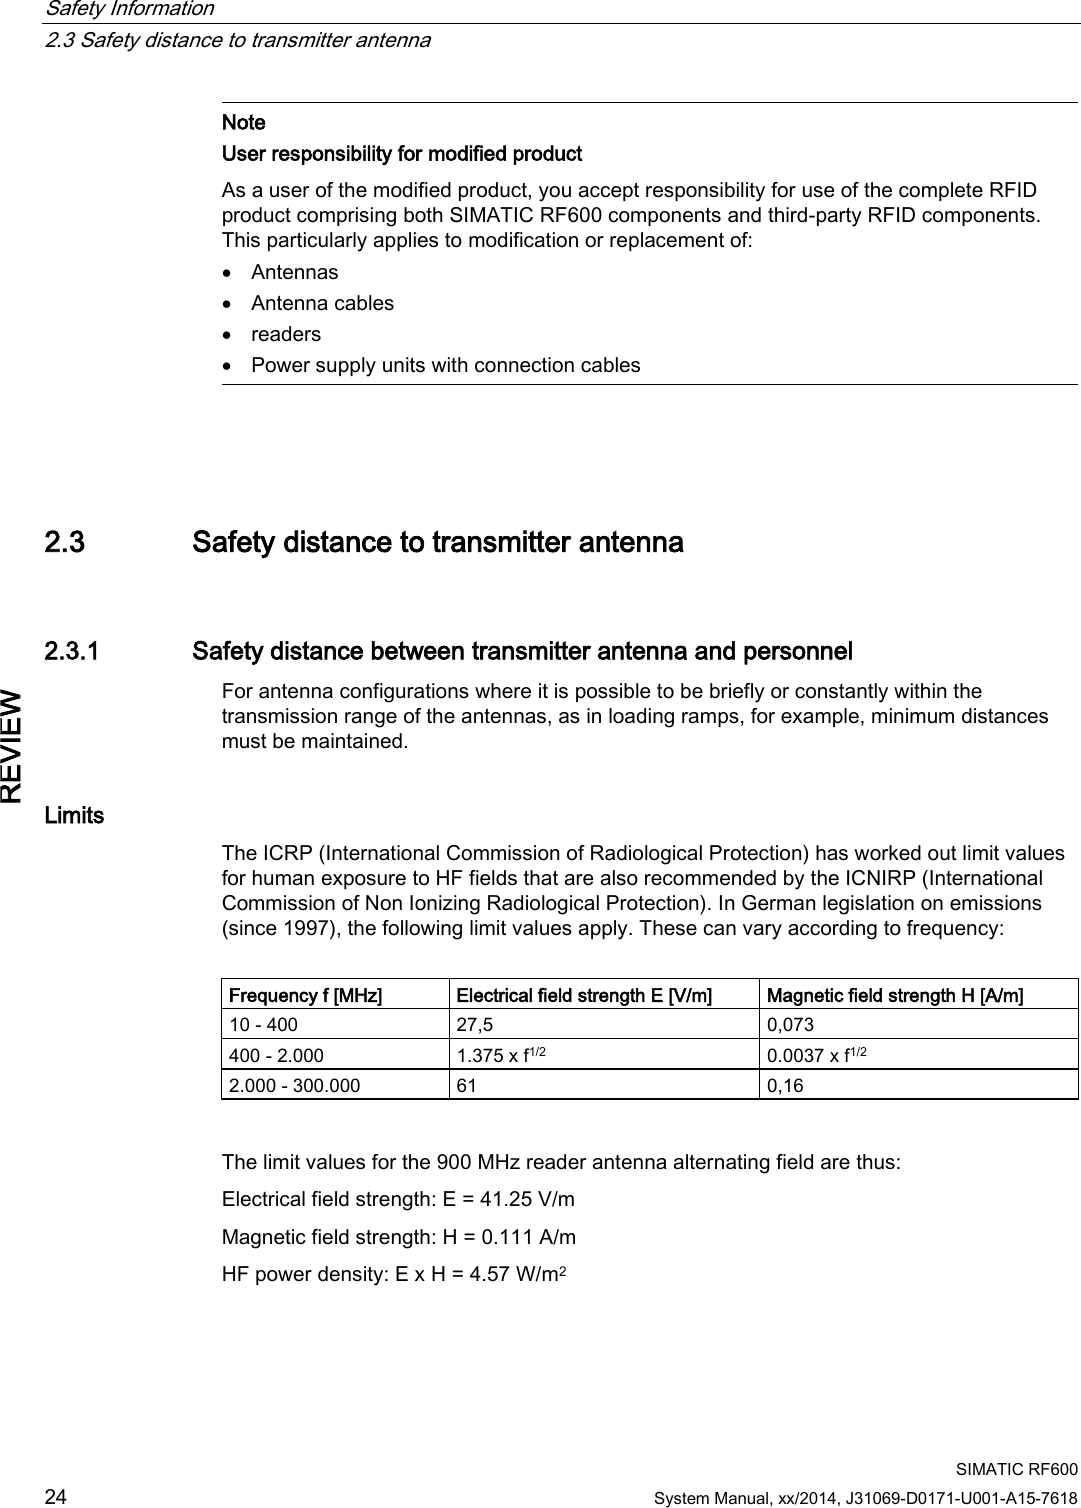 Safety Information   2.3 Safety distance to transmitter antenna  SIMATIC RF600 24 System Manual, xx/2014, J31069-D0171-U001-A15-7618 REVIEW  Note User responsibility for modified product As a user of the modified product, you accept responsibility for use of the complete RFID product comprising both SIMATIC RF600 components and third-party RFID components. This particularly applies to modification or replacement of: • Antennas • Antenna cables • readers • Power supply units with connection cables   2.3 Safety distance to transmitter antenna 2.3.1 Safety distance between transmitter antenna and personnel For antenna configurations where it is possible to be briefly or constantly within the transmission range of the antennas, as in loading ramps, for example, minimum distances must be maintained.  Limits The ICRP (International Commission of Radiological Protection) has worked out limit values for human exposure to HF fields that are also recommended by the ICNIRP (International Commission of Non Ionizing Radiological Protection). In German legislation on emissions (since 1997), the following limit values apply. These can vary according to frequency:  Frequency f [MHz] Electrical field strength E [V/m] Magnetic field strength H [A/m] 10 - 400 27,5 0,073 400 - 2.000 1.375 x f1/2 0.0037 x f1/2 2.000 - 300.000 61 0,16  The limit values for the 900 MHz reader antenna alternating field are thus: Electrical field strength: E = 41.25 V/m Magnetic field strength: H = 0.111 A/m HF power density: E x H = 4.57 W/m2 